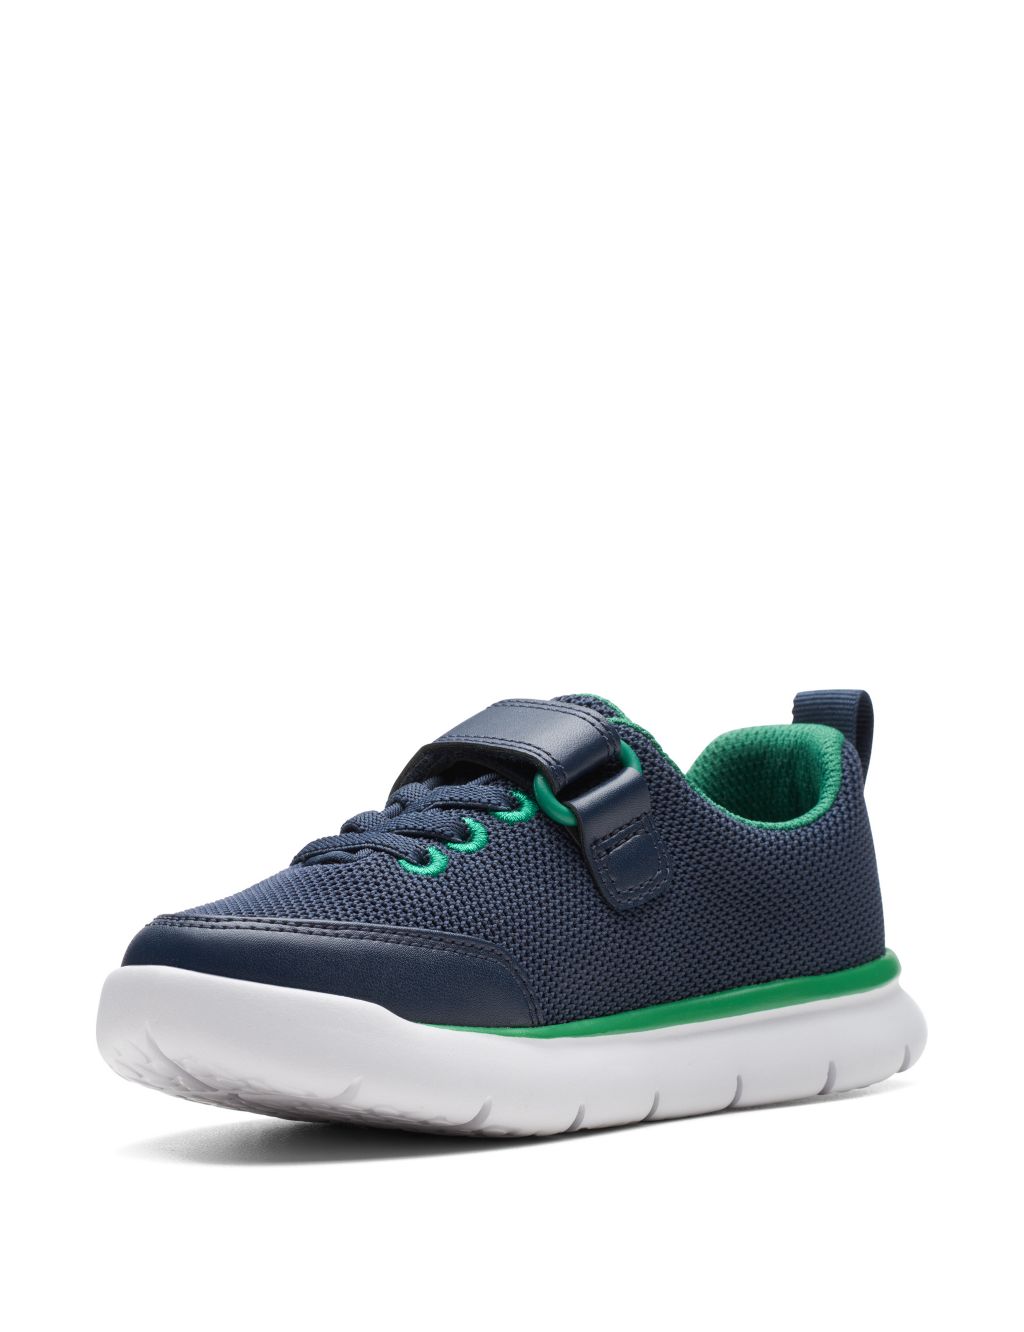 Kids' Riptape Trainers (10 Small - 5½ Large) image 3